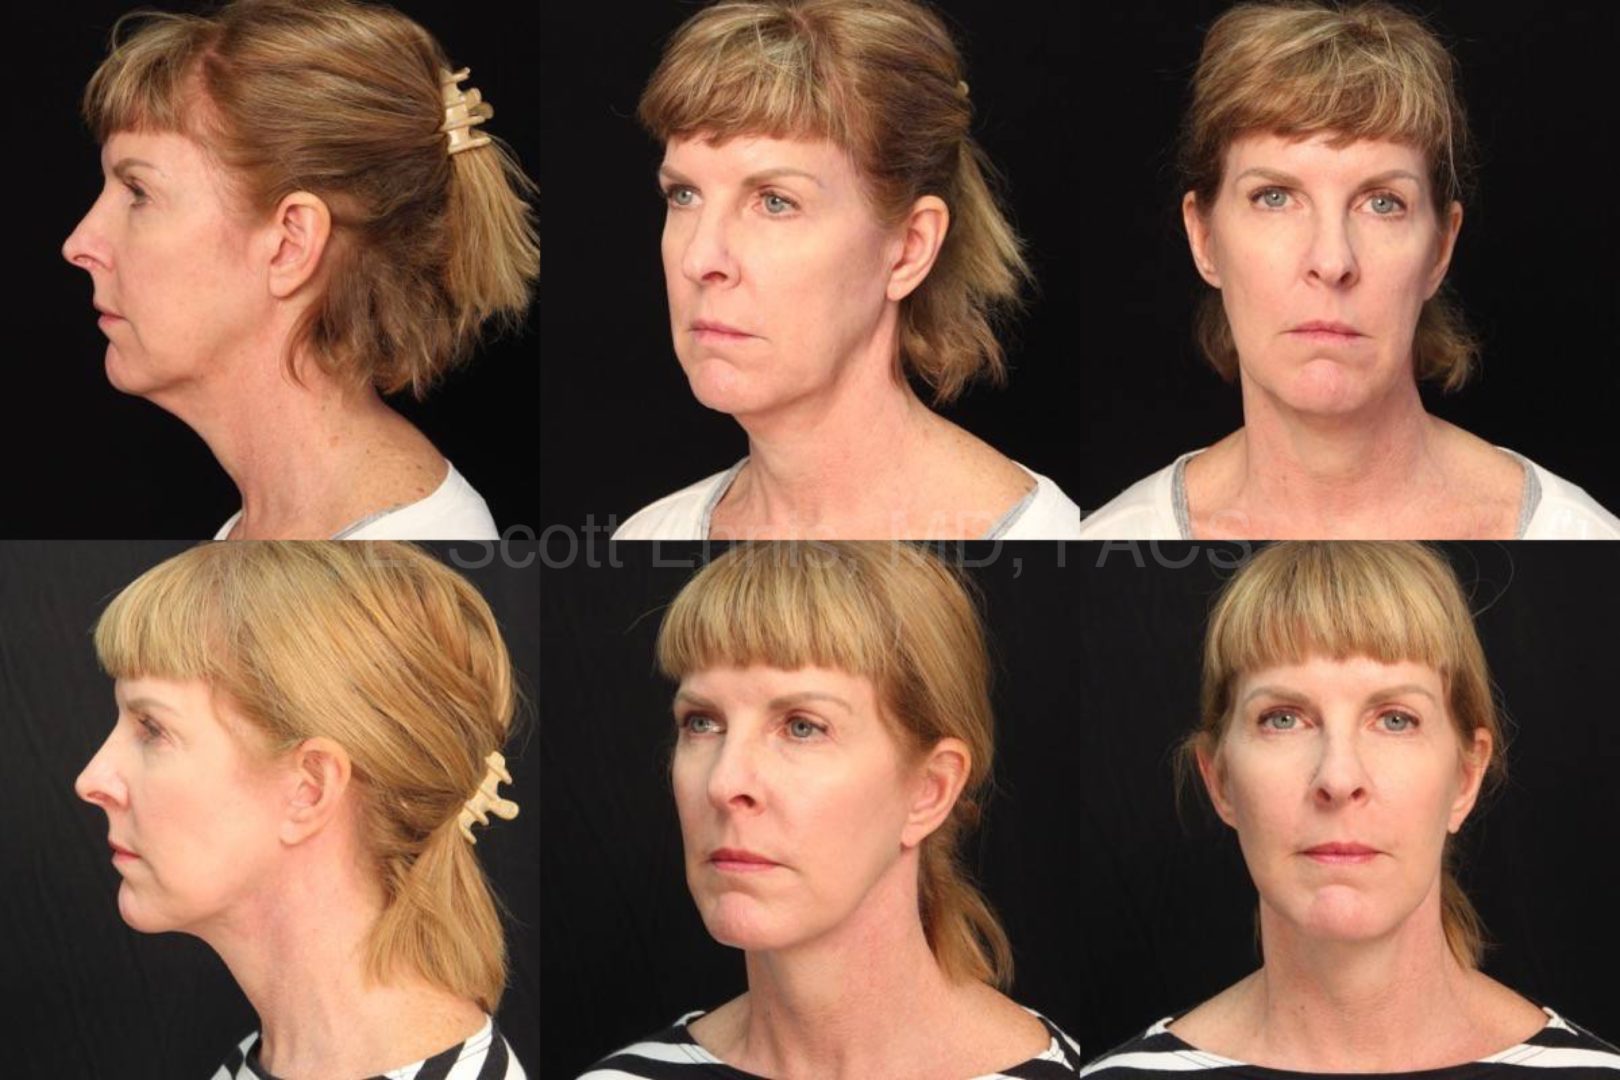 Ennis MD Before and After 55yof Facelift Exc of Buccal fat pads (20150817073730276) 20160712141911754 39602